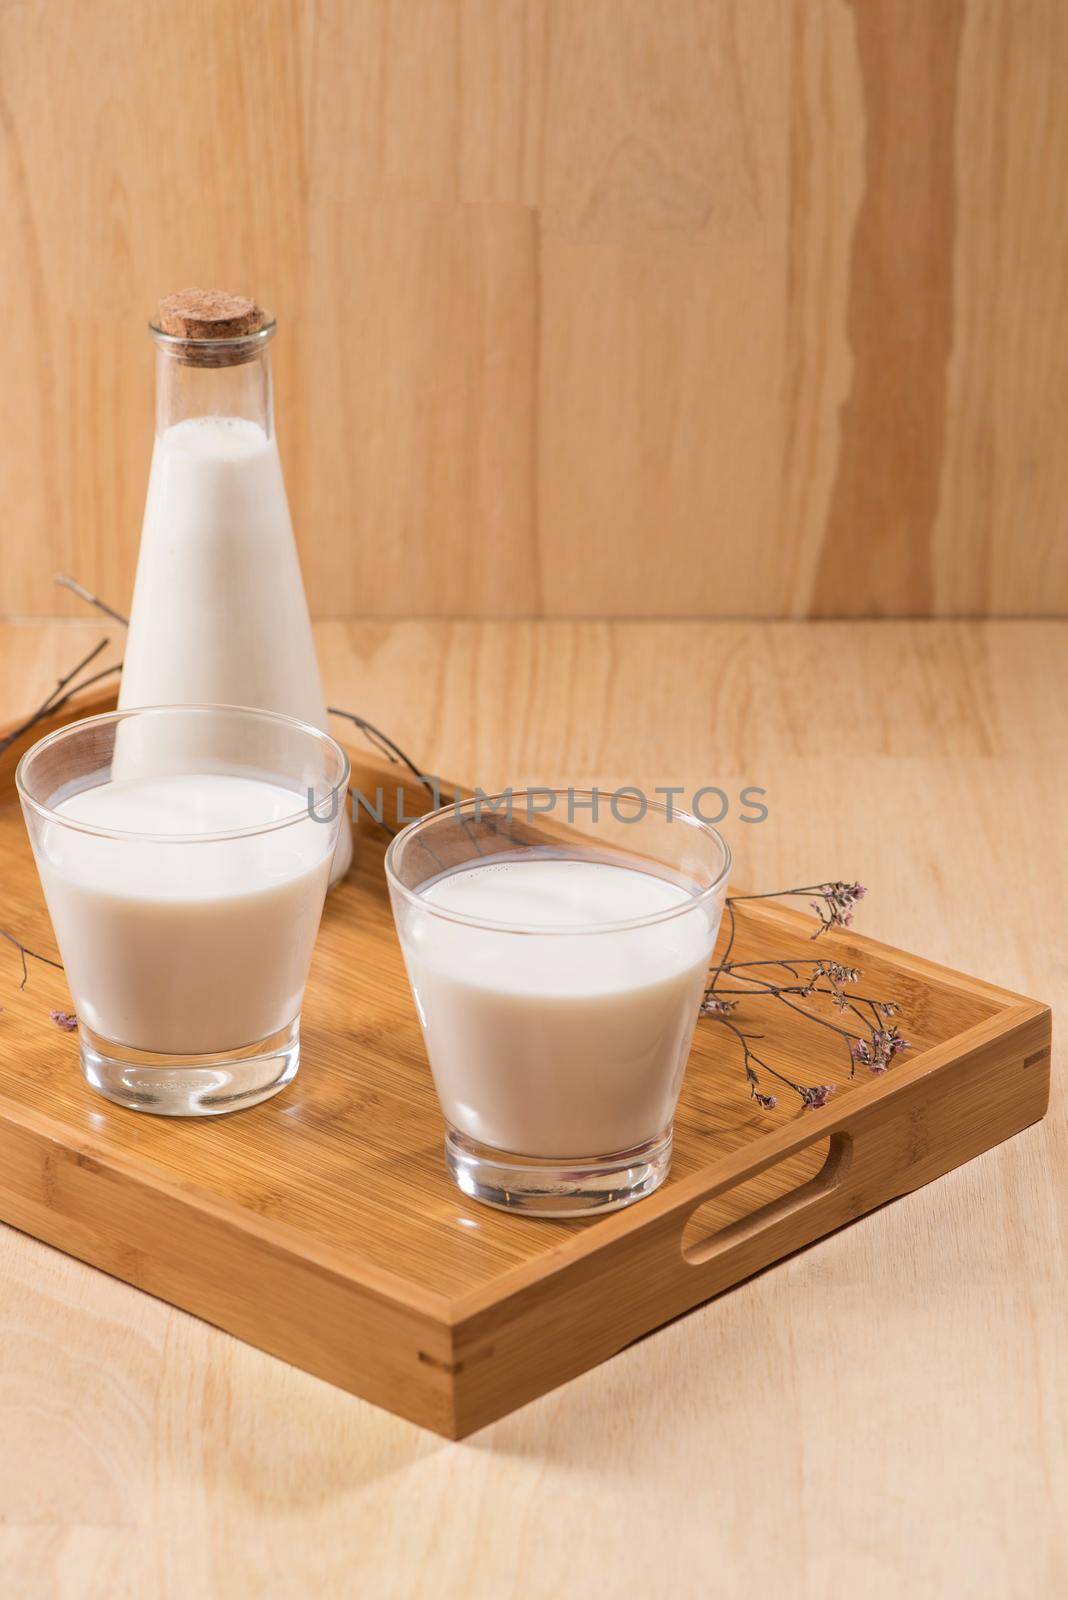 Dairy products. A bottle of milk and glass of milk on a wooden table. by makidotvn